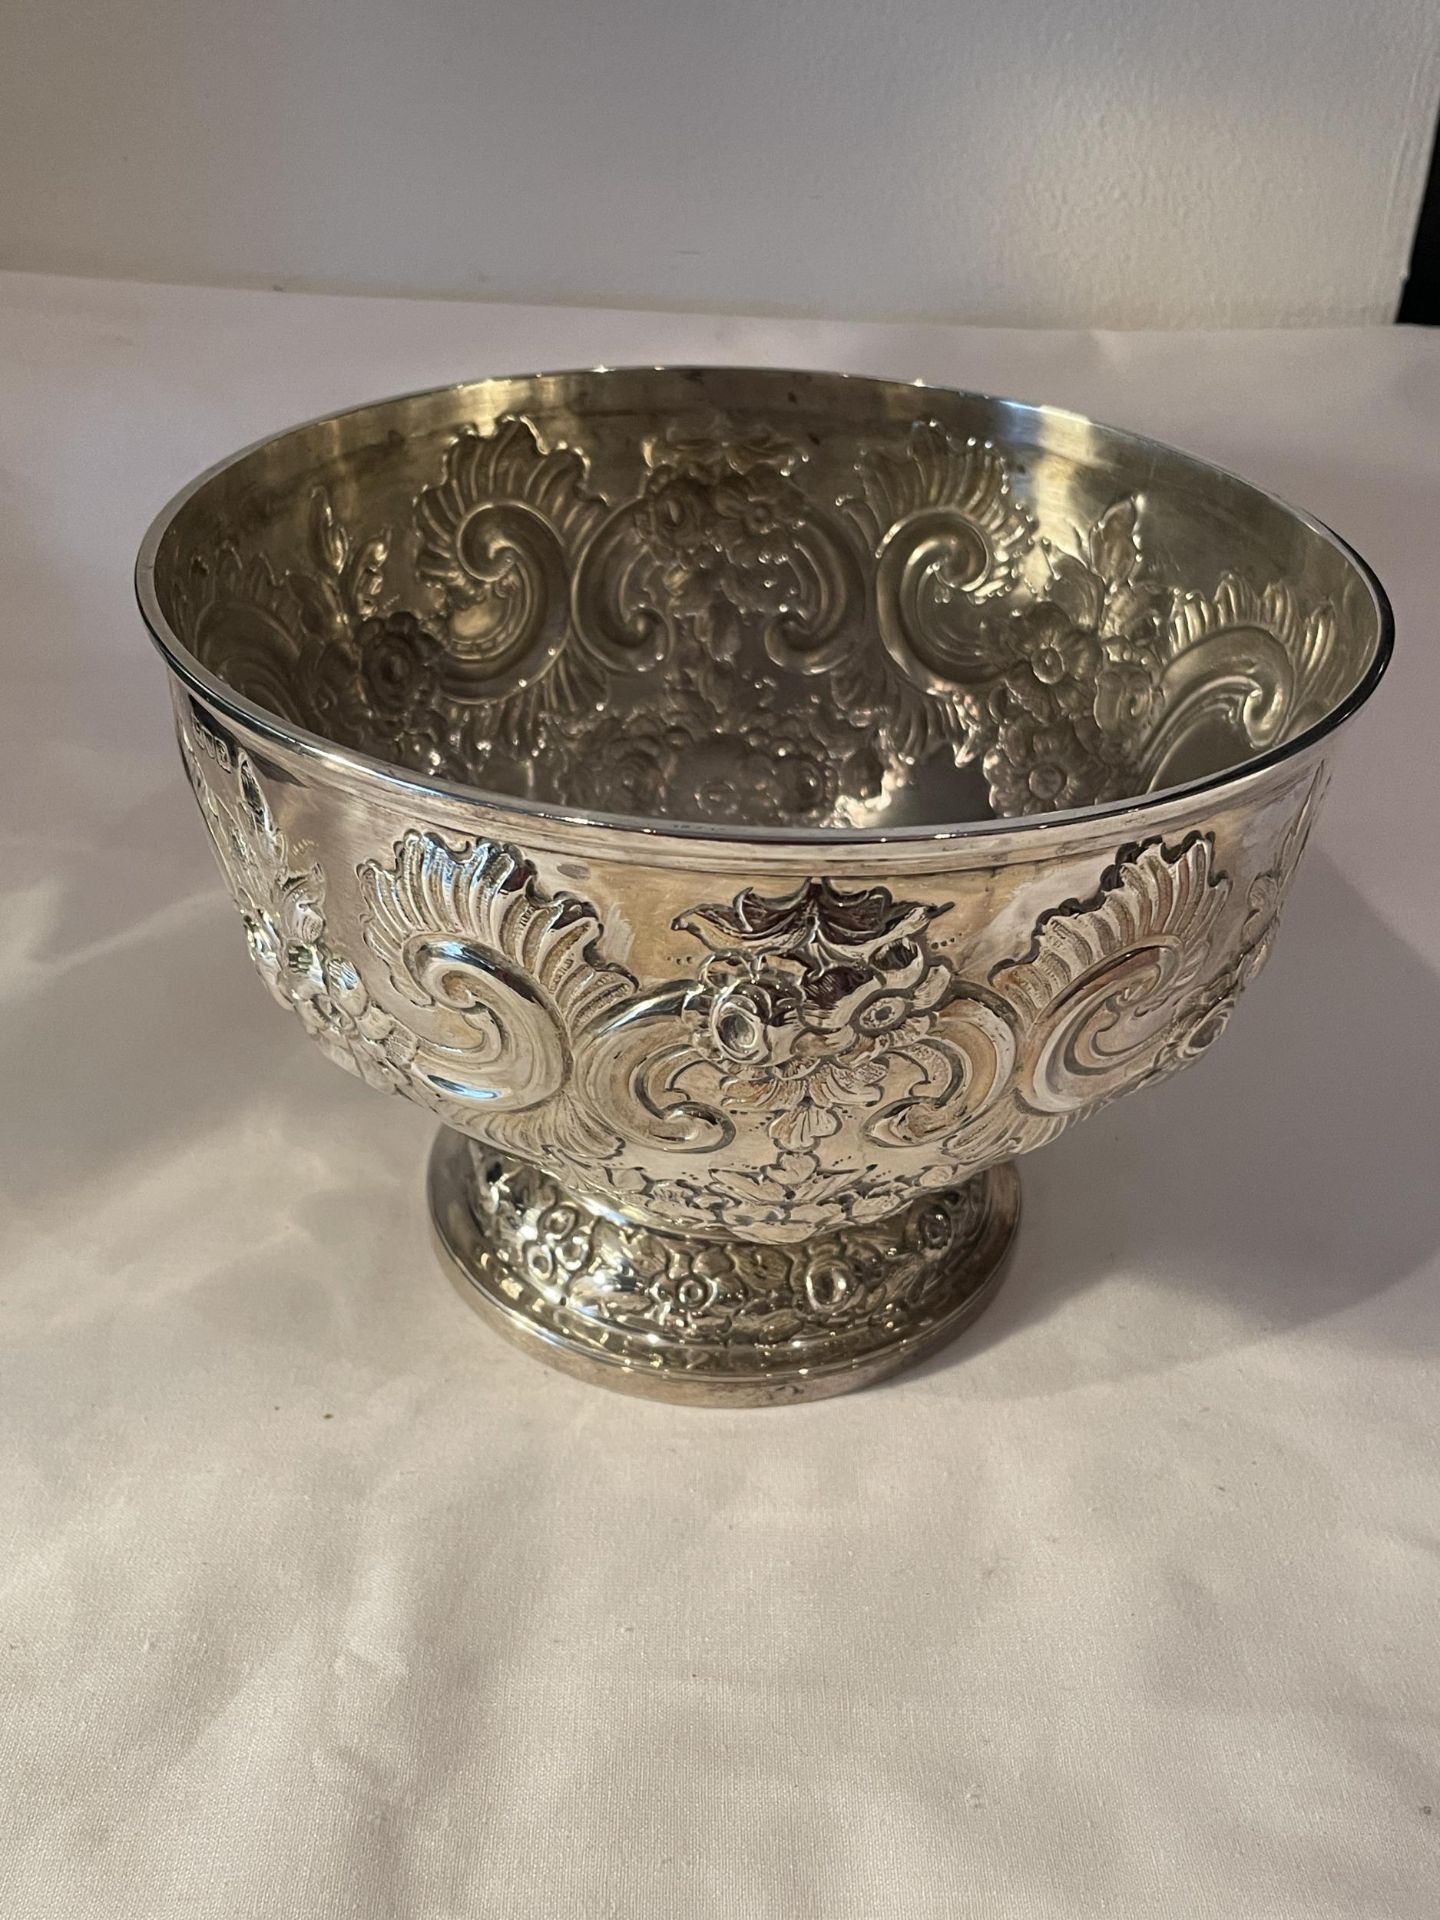 A 1901 HALLMARKED LONDON SILVER DECORATIVE FOOTED BOWL, INDISTINCT MAKER, GROSS WEIGHT 385 GRAMS - Image 4 of 15